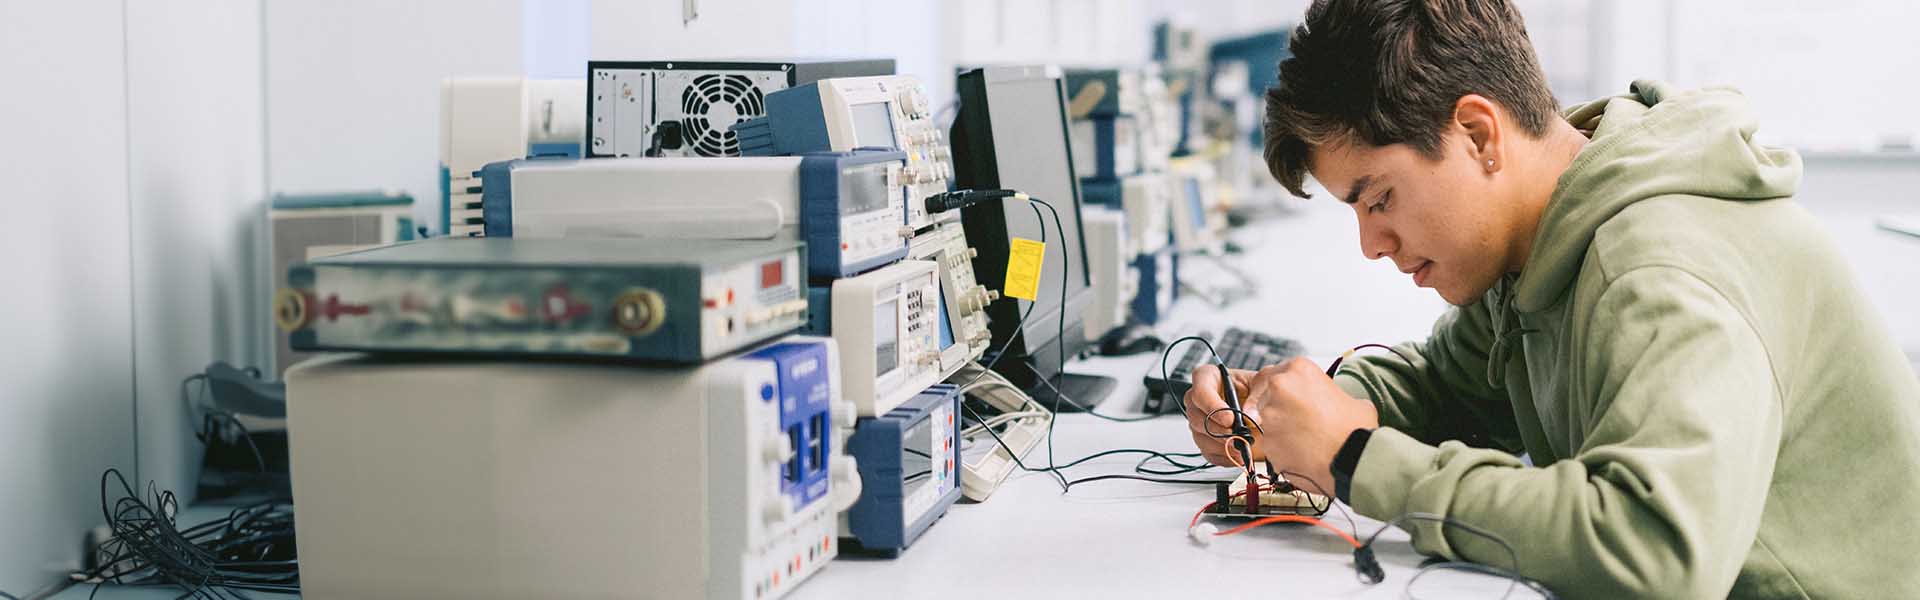 Student working in an electronics lab learning electrical engineering